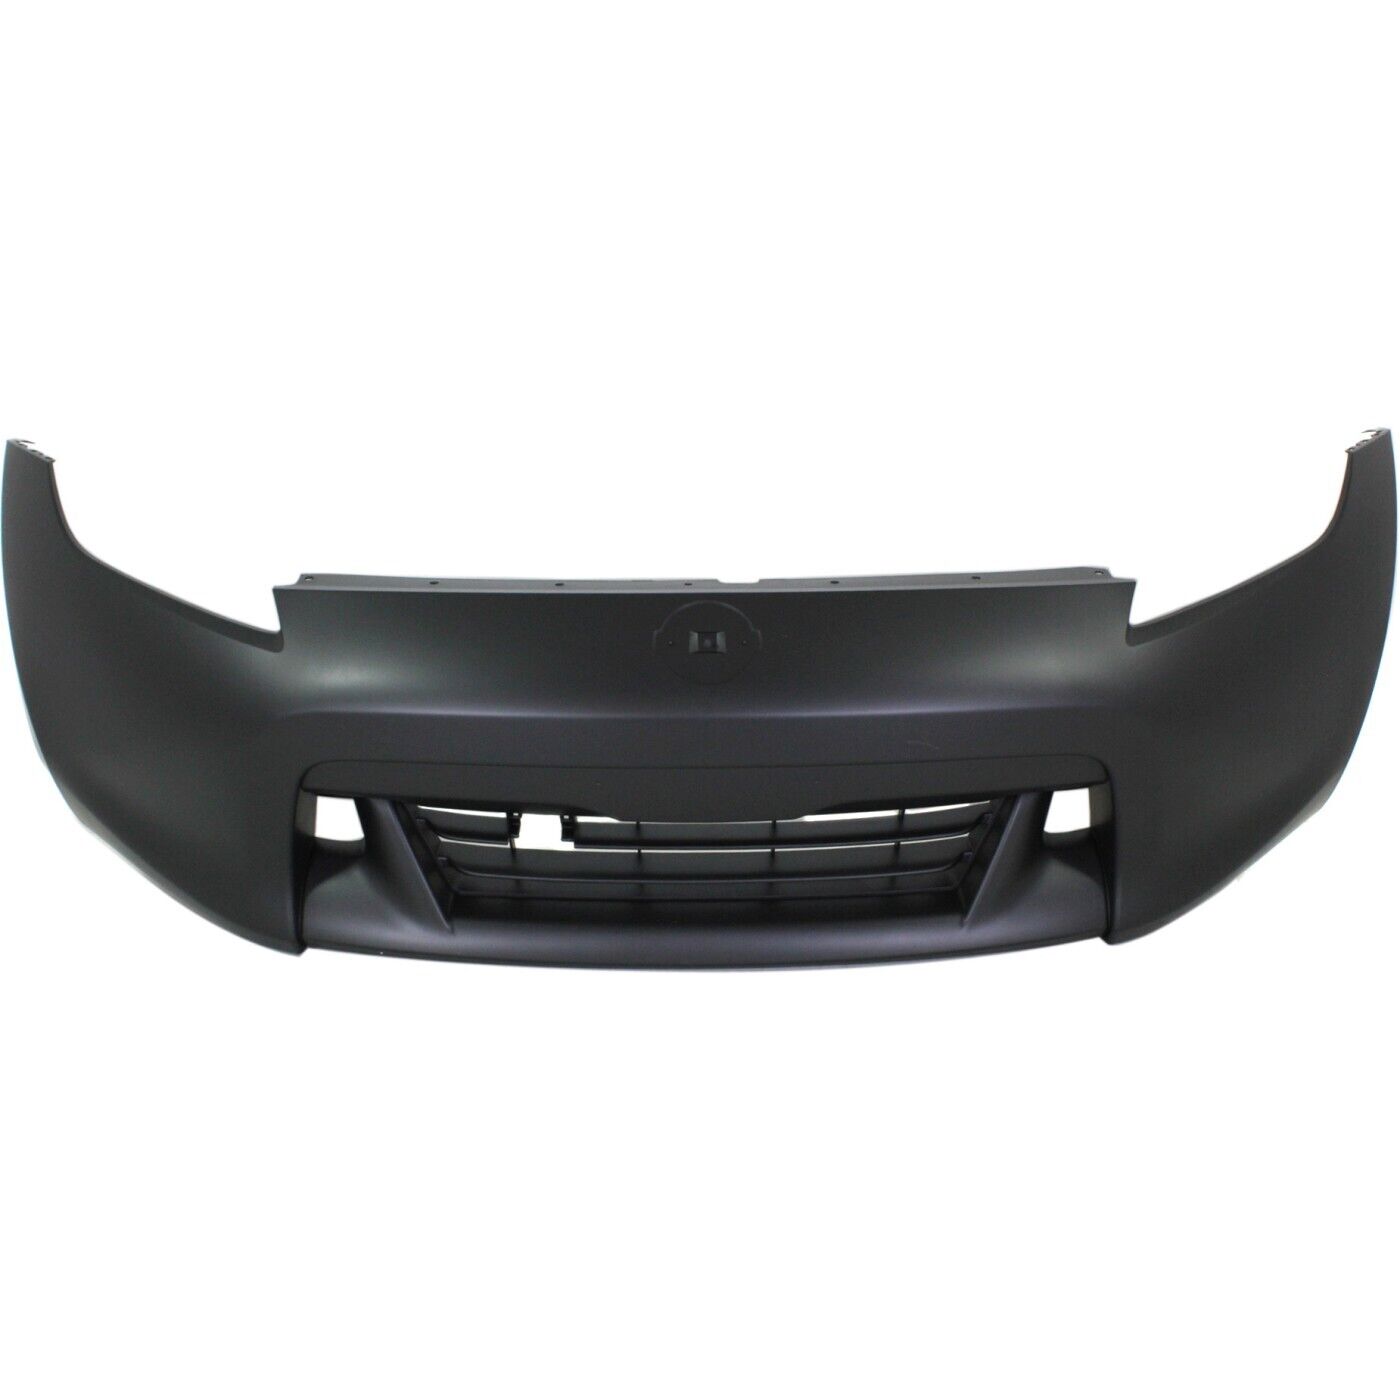 Bumper Cover For 2009-2012 Nissan 370Z Front Paint To Match w/ Air Spoiler CAPA